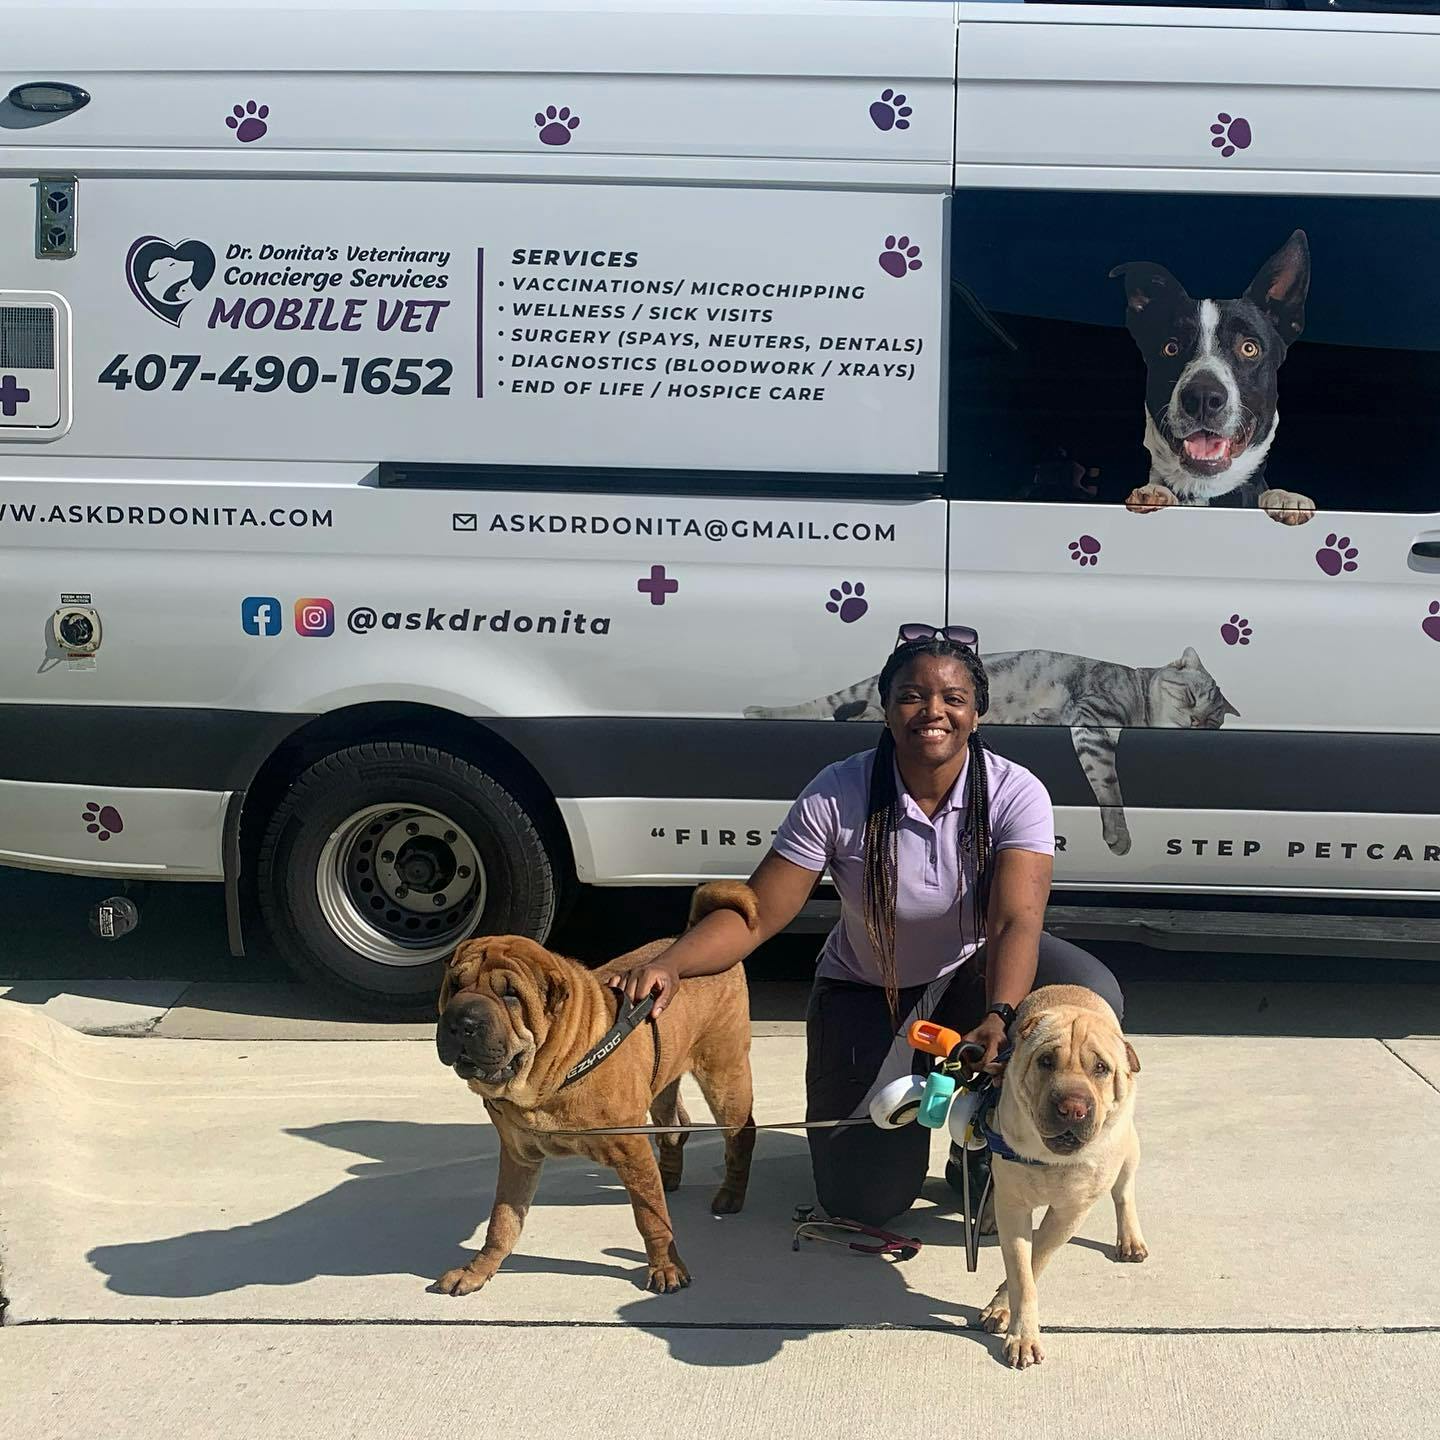 McCants outside her mobile veterinary clinic with patients. (Image courtesy of Dr Donita)